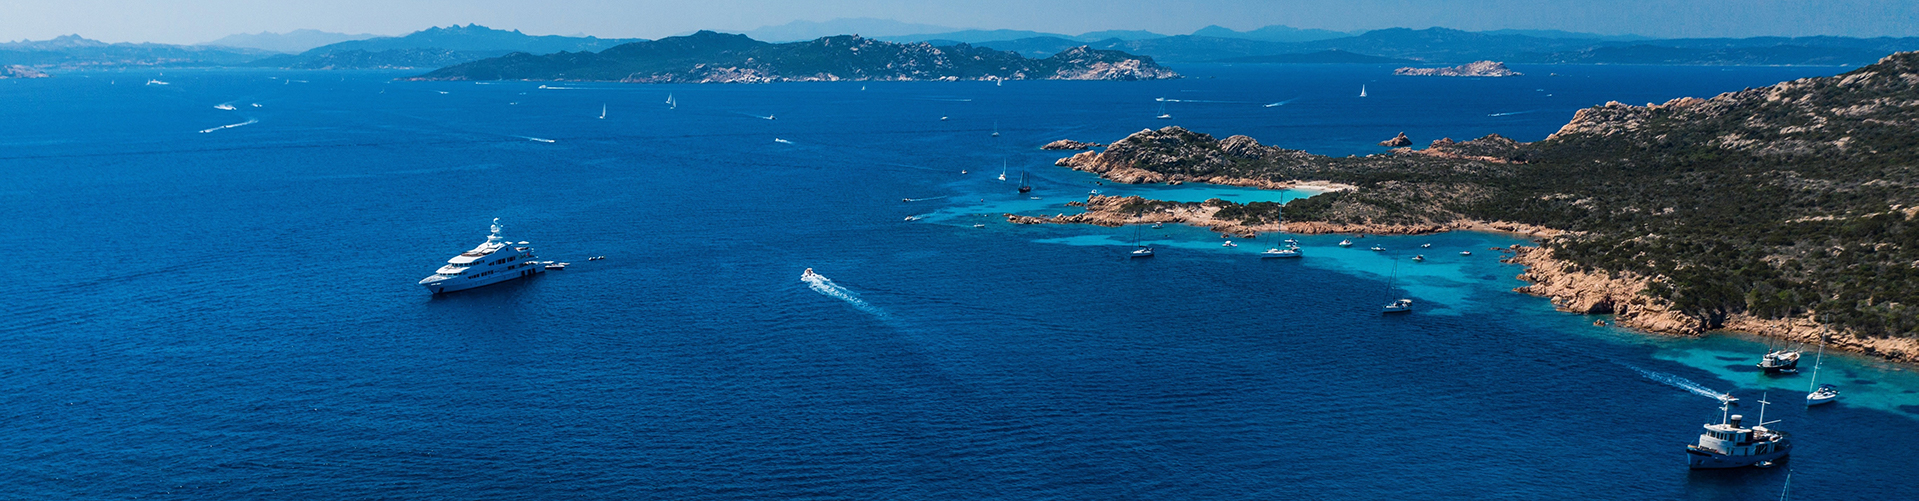 Tour of the Island of Maddalena